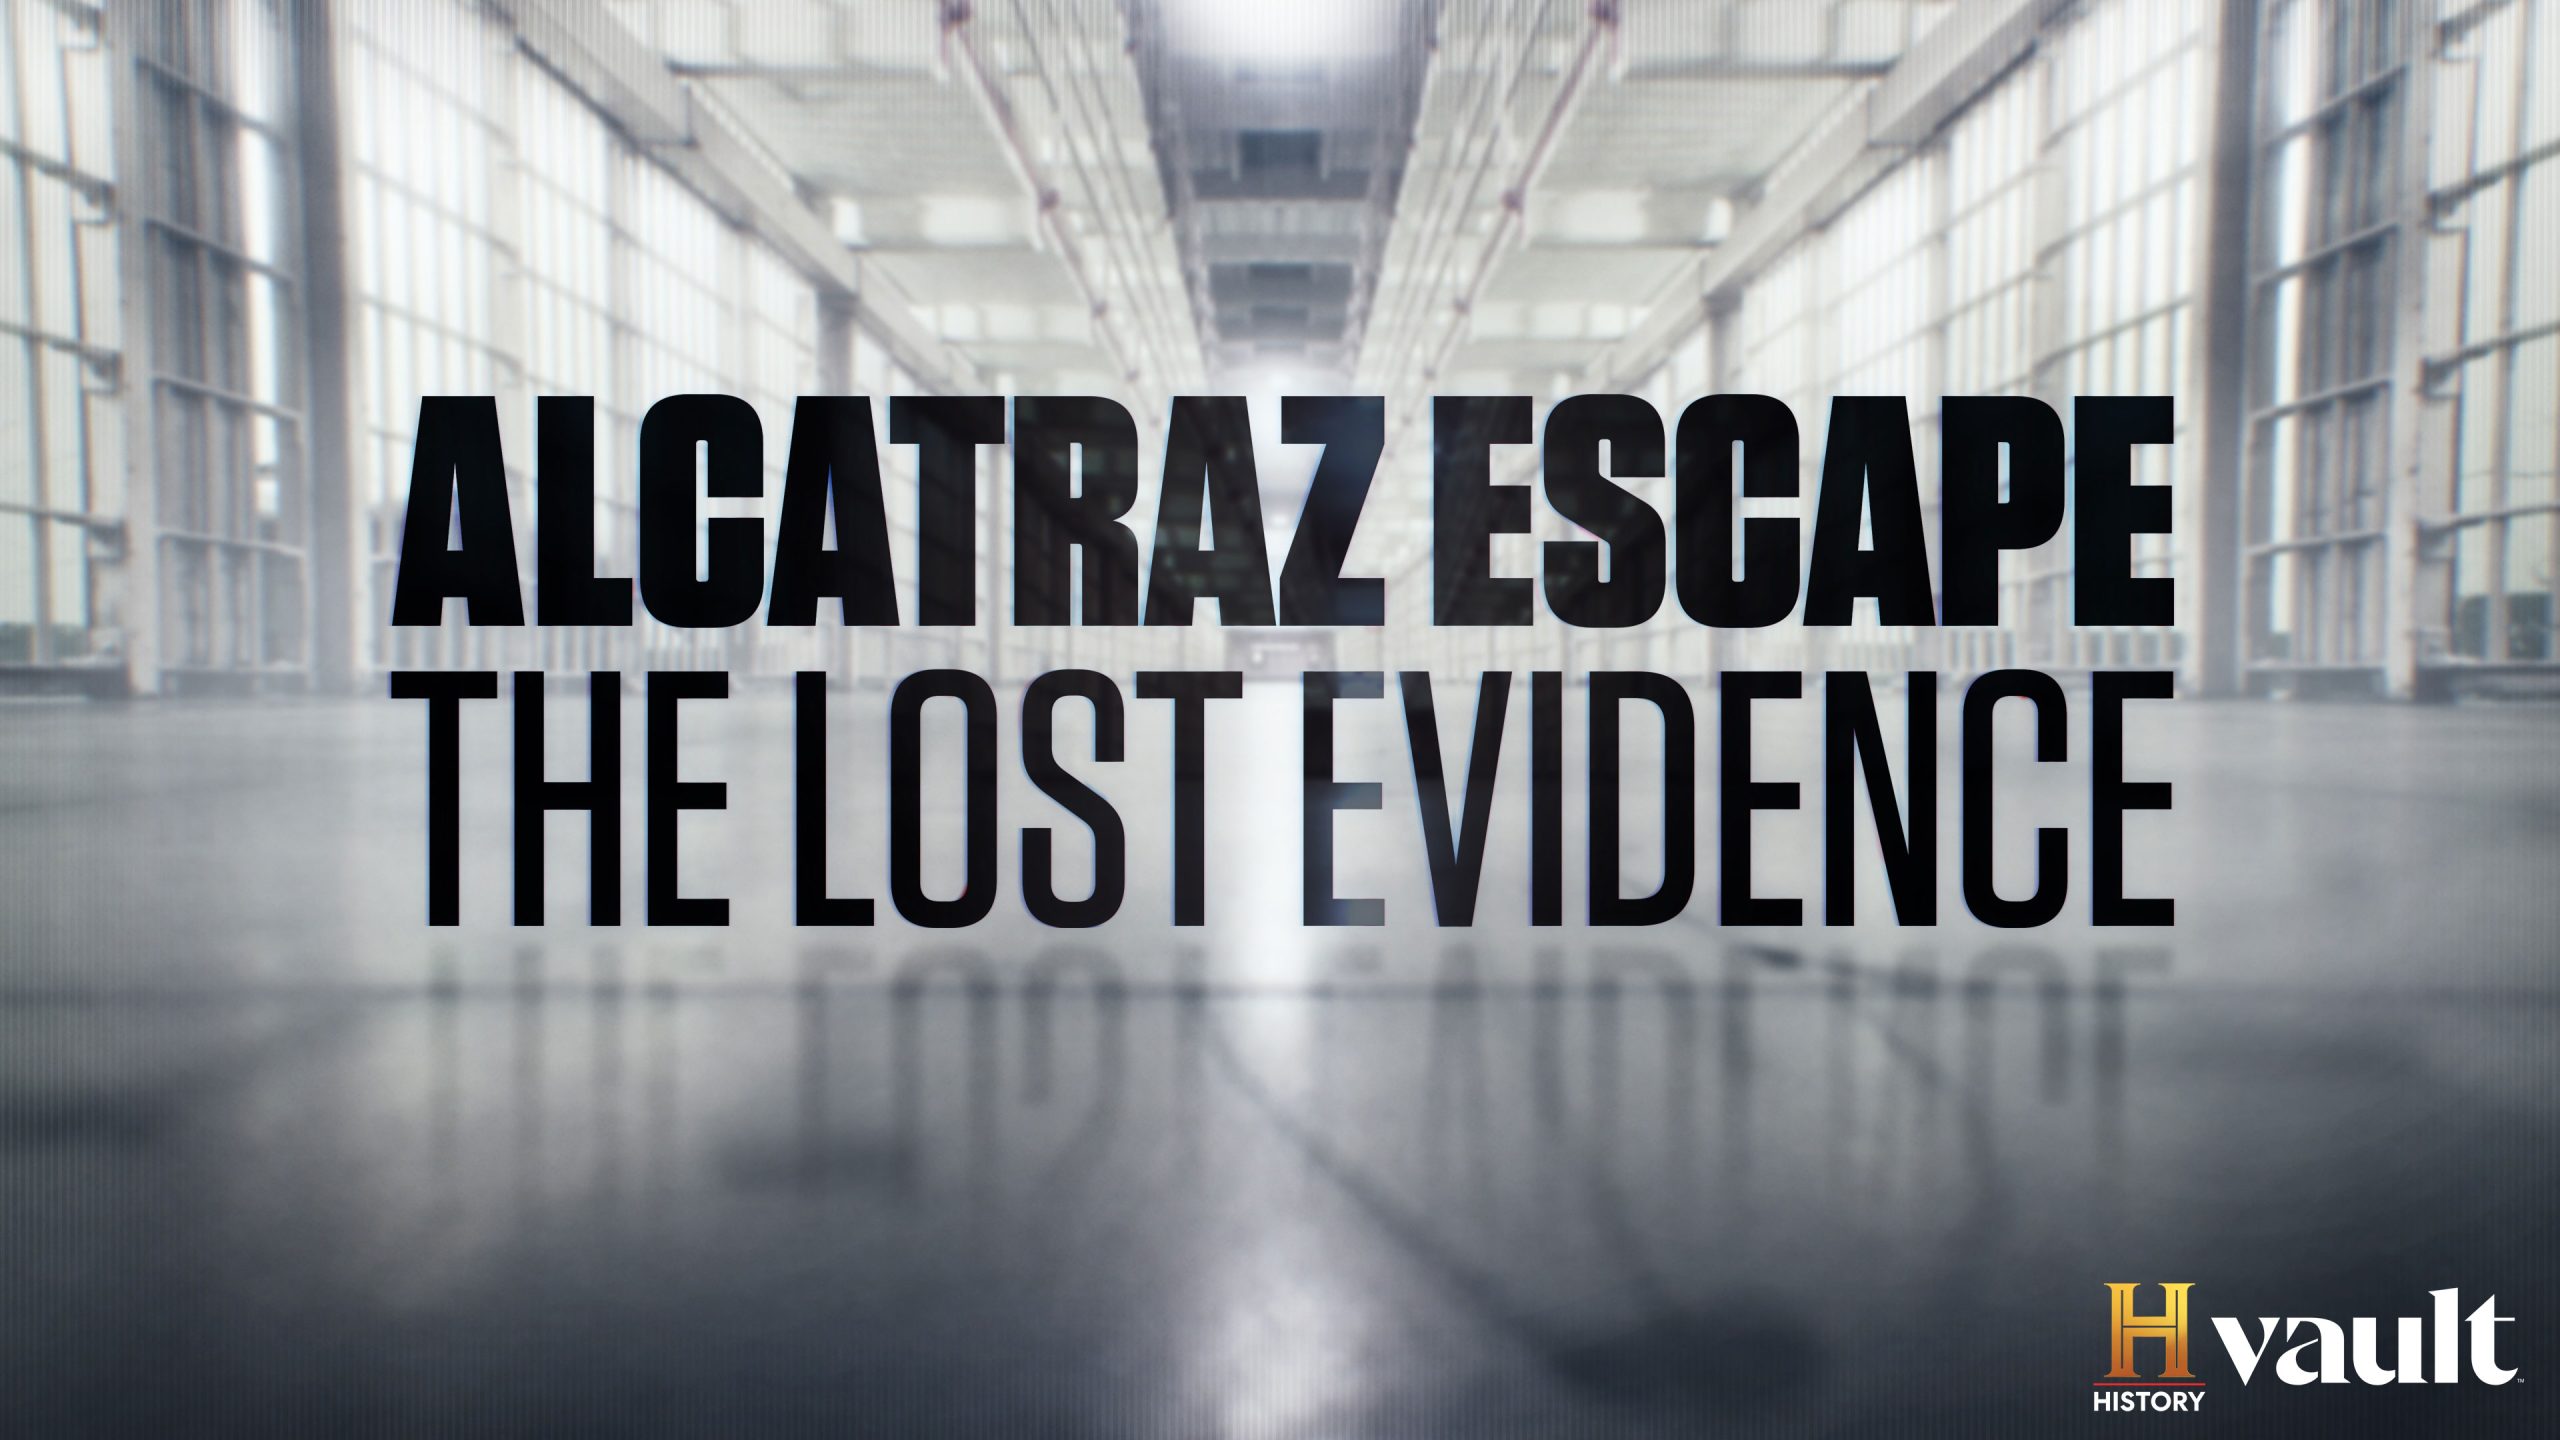 Watch Alcatraz Escape: The Lost Evidence on HISTORY Vault